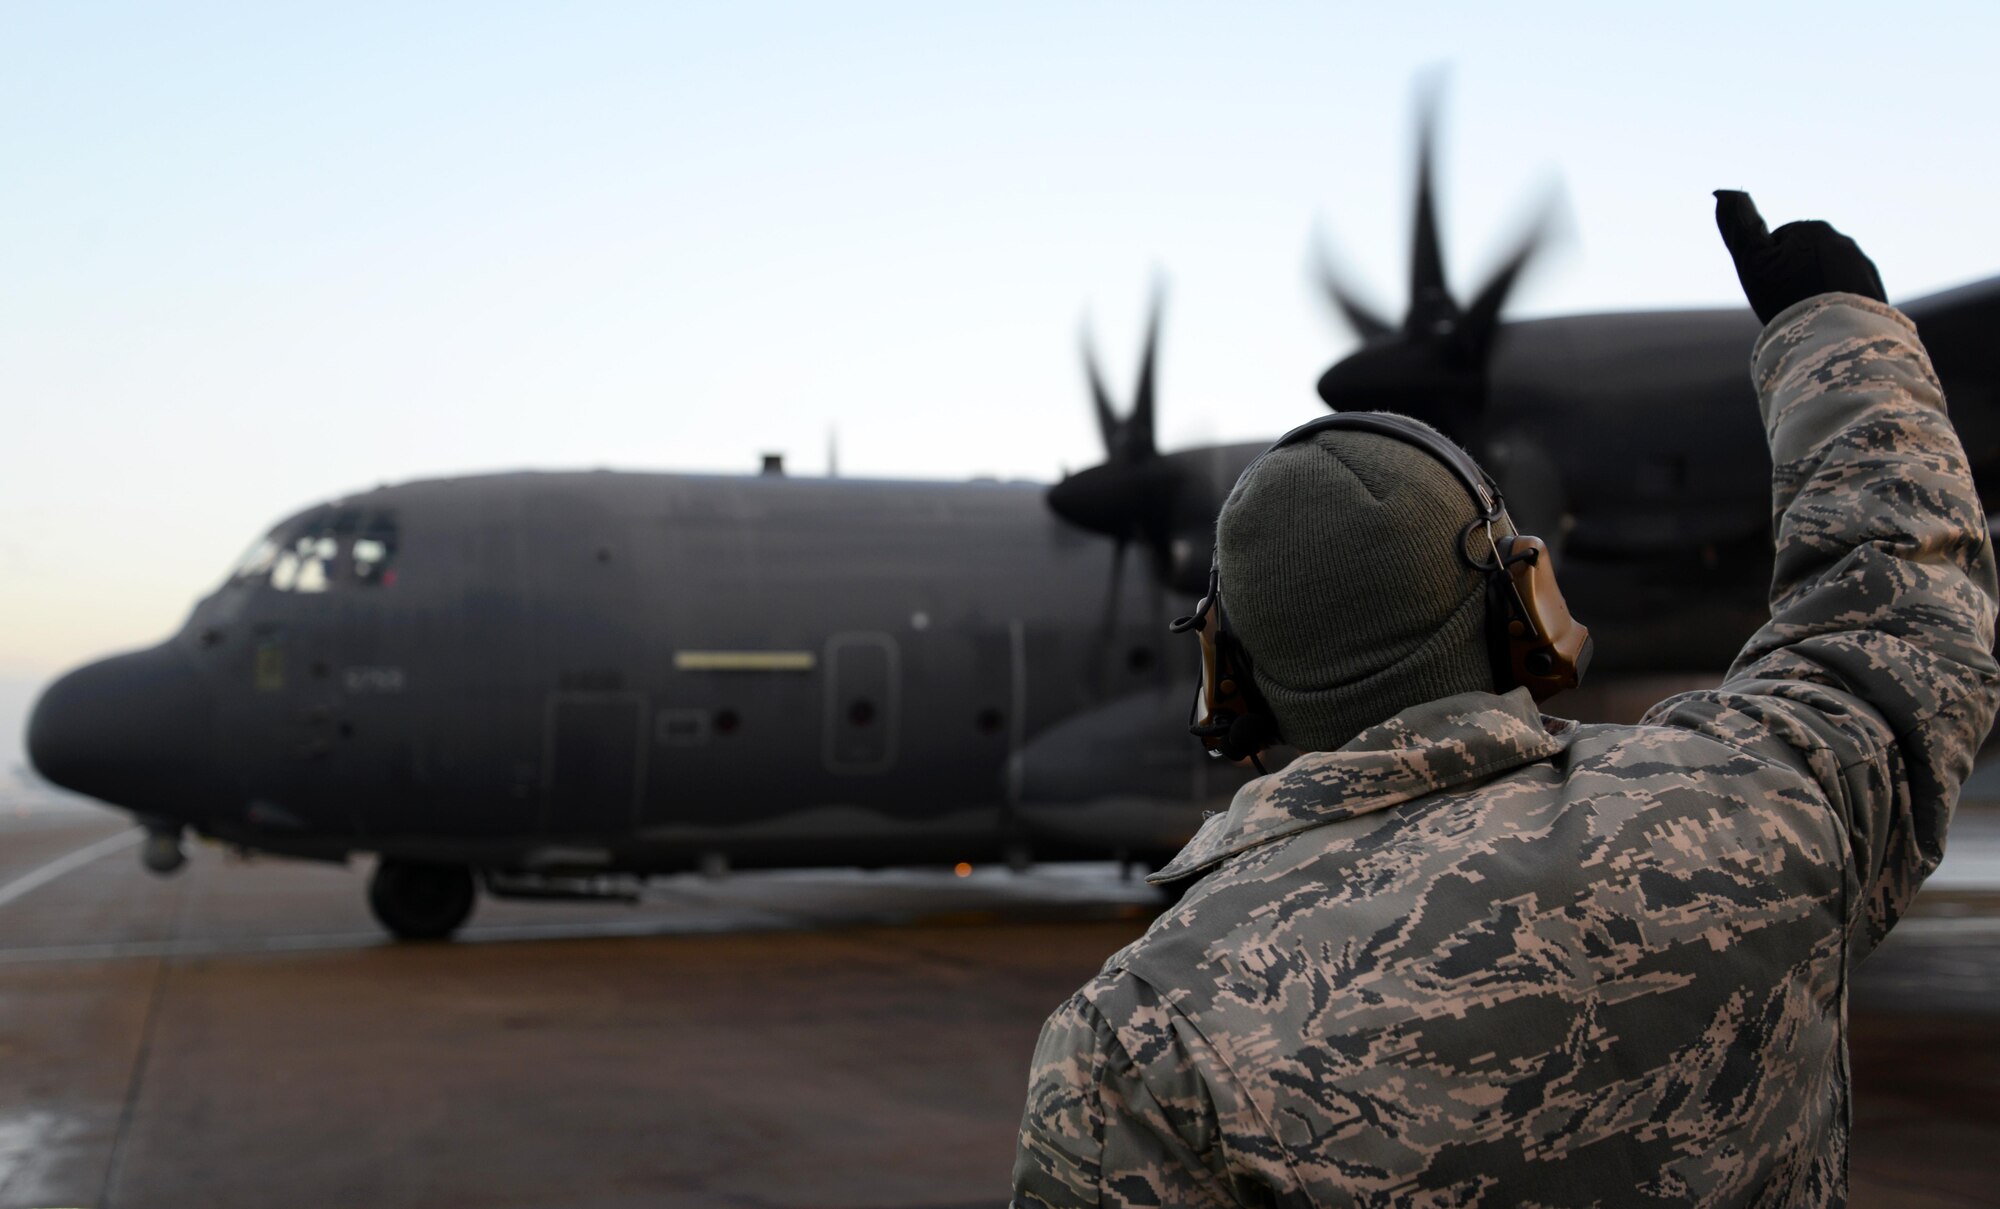 A U.S. Air Force crewchief, assigned to the 352d Special Operations Aircraft Maintenance Squadron, gives a thumbs up to an MC-130J Commando II from the 67th Special Operations Squdron Jan. 17, 2016, as it taxis on the flight line on RAF Mildenhall, England. Prior to takeoff the aircraft underwent de-icing procedures to ensure free movement of the primary and secondary flight controls. (U.S. Air Force photo by Senior Airman Justine Rho)